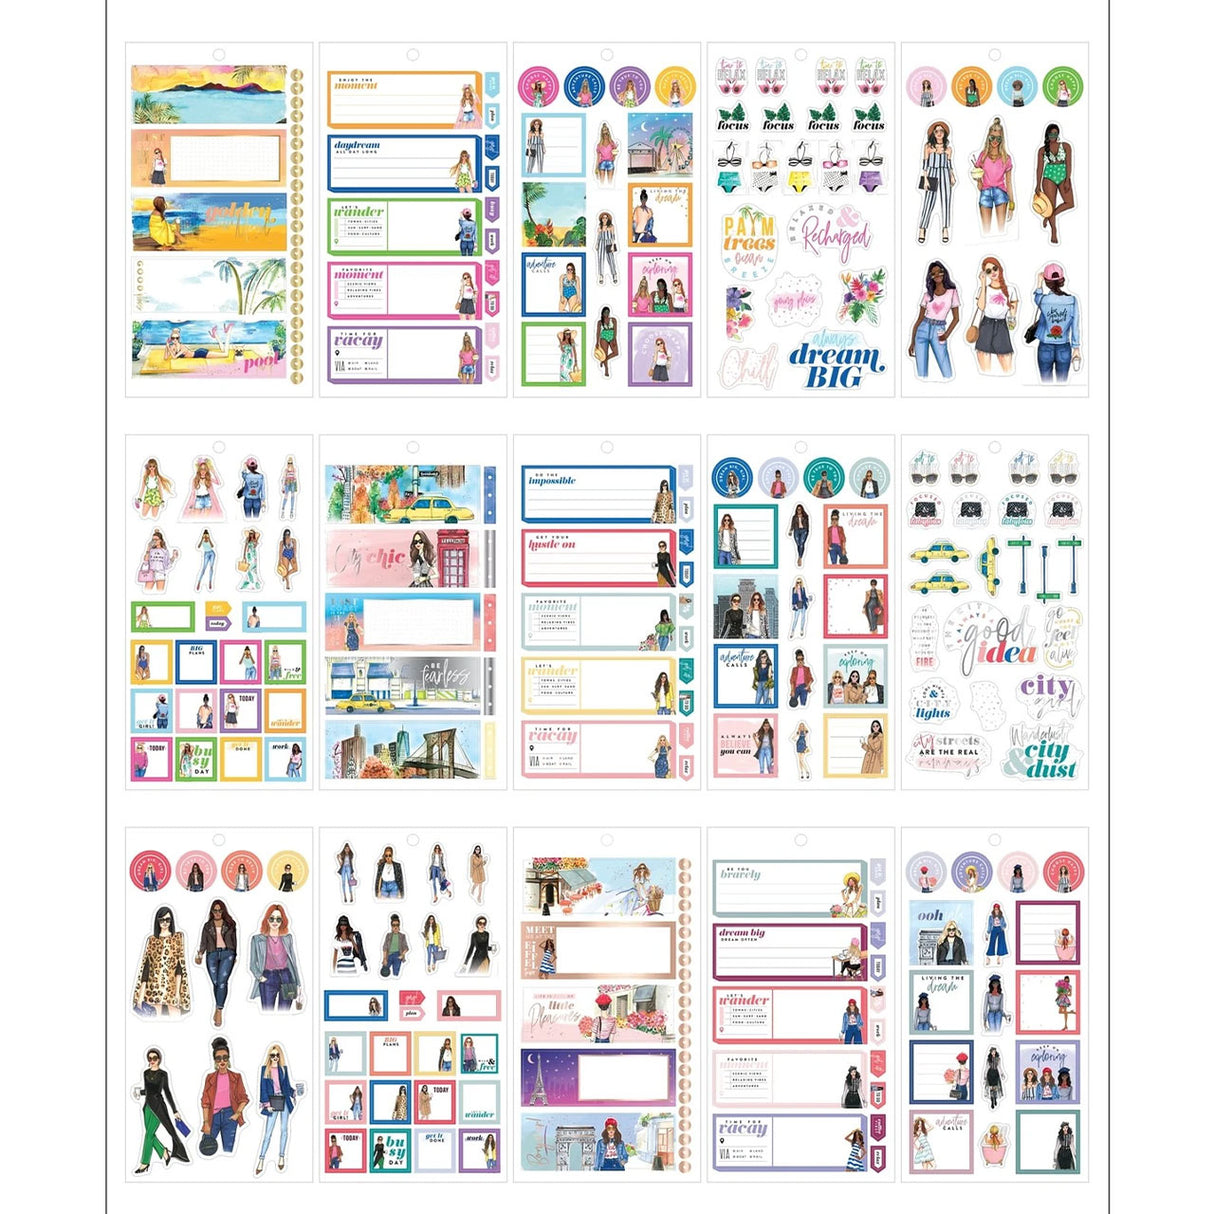 Happy Planner Mini RongRong Going Places Stickers Value Pack